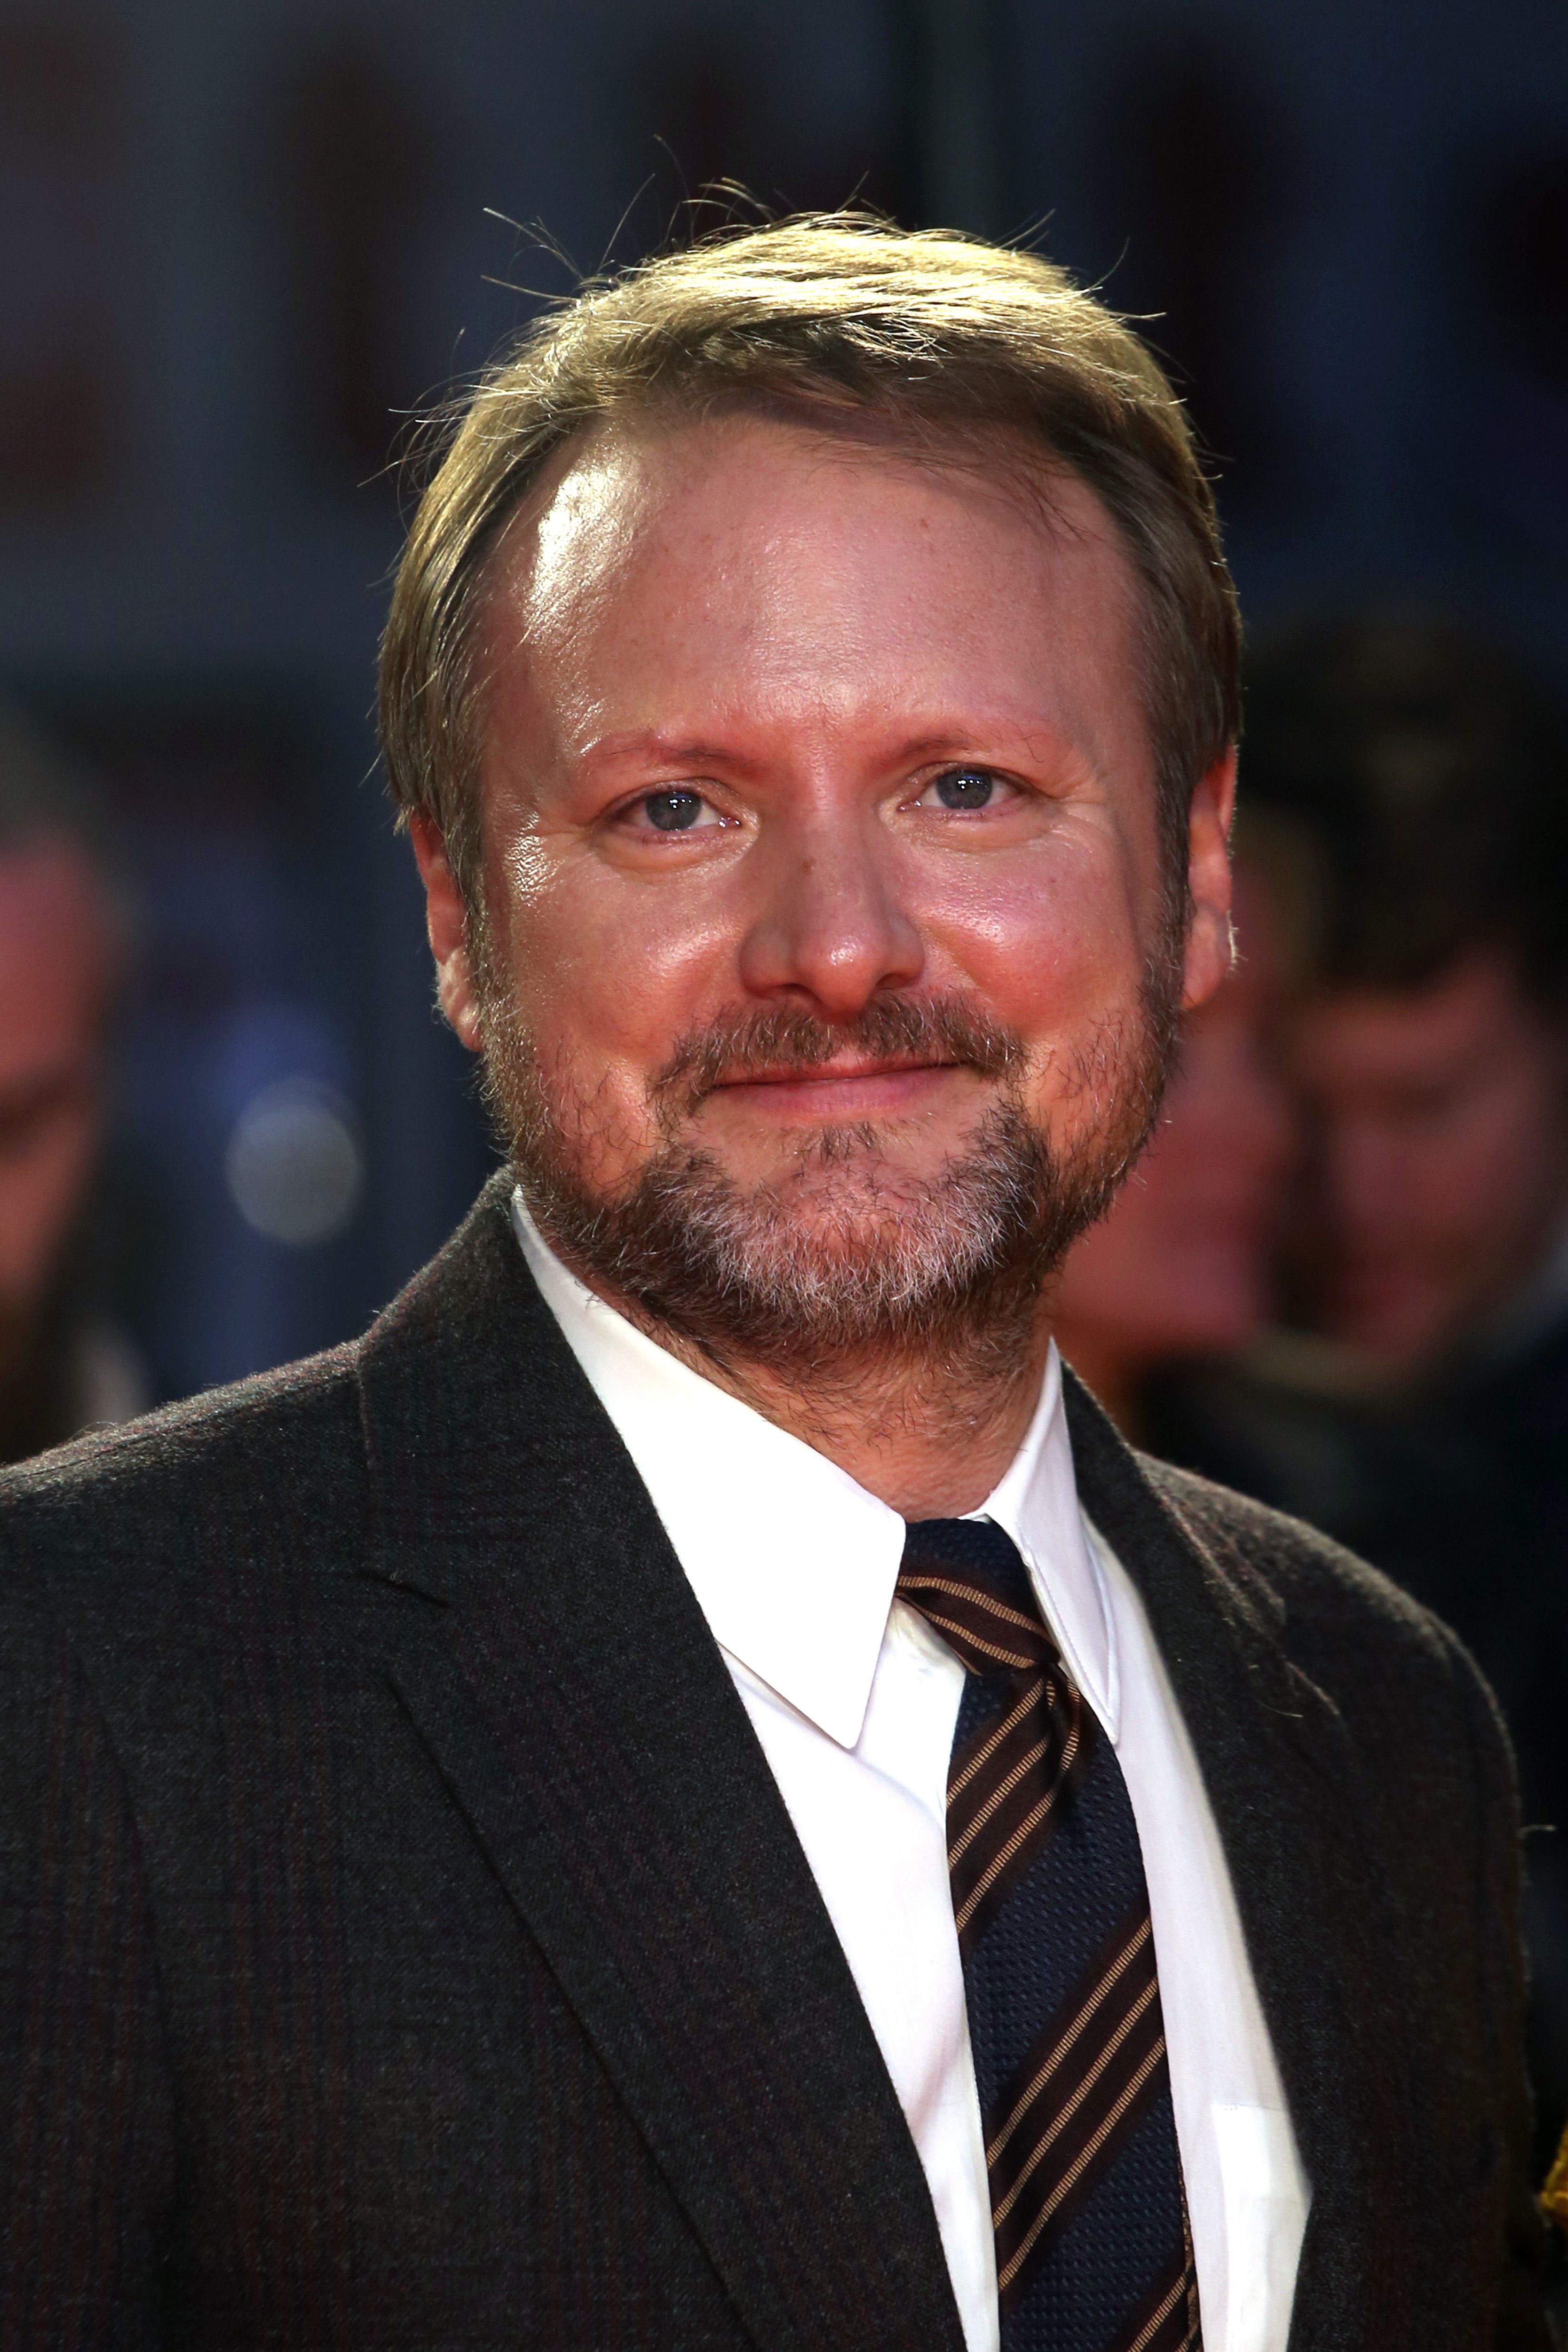 Will the audience ever forgive me?”: Rian Johnson Claims Knives